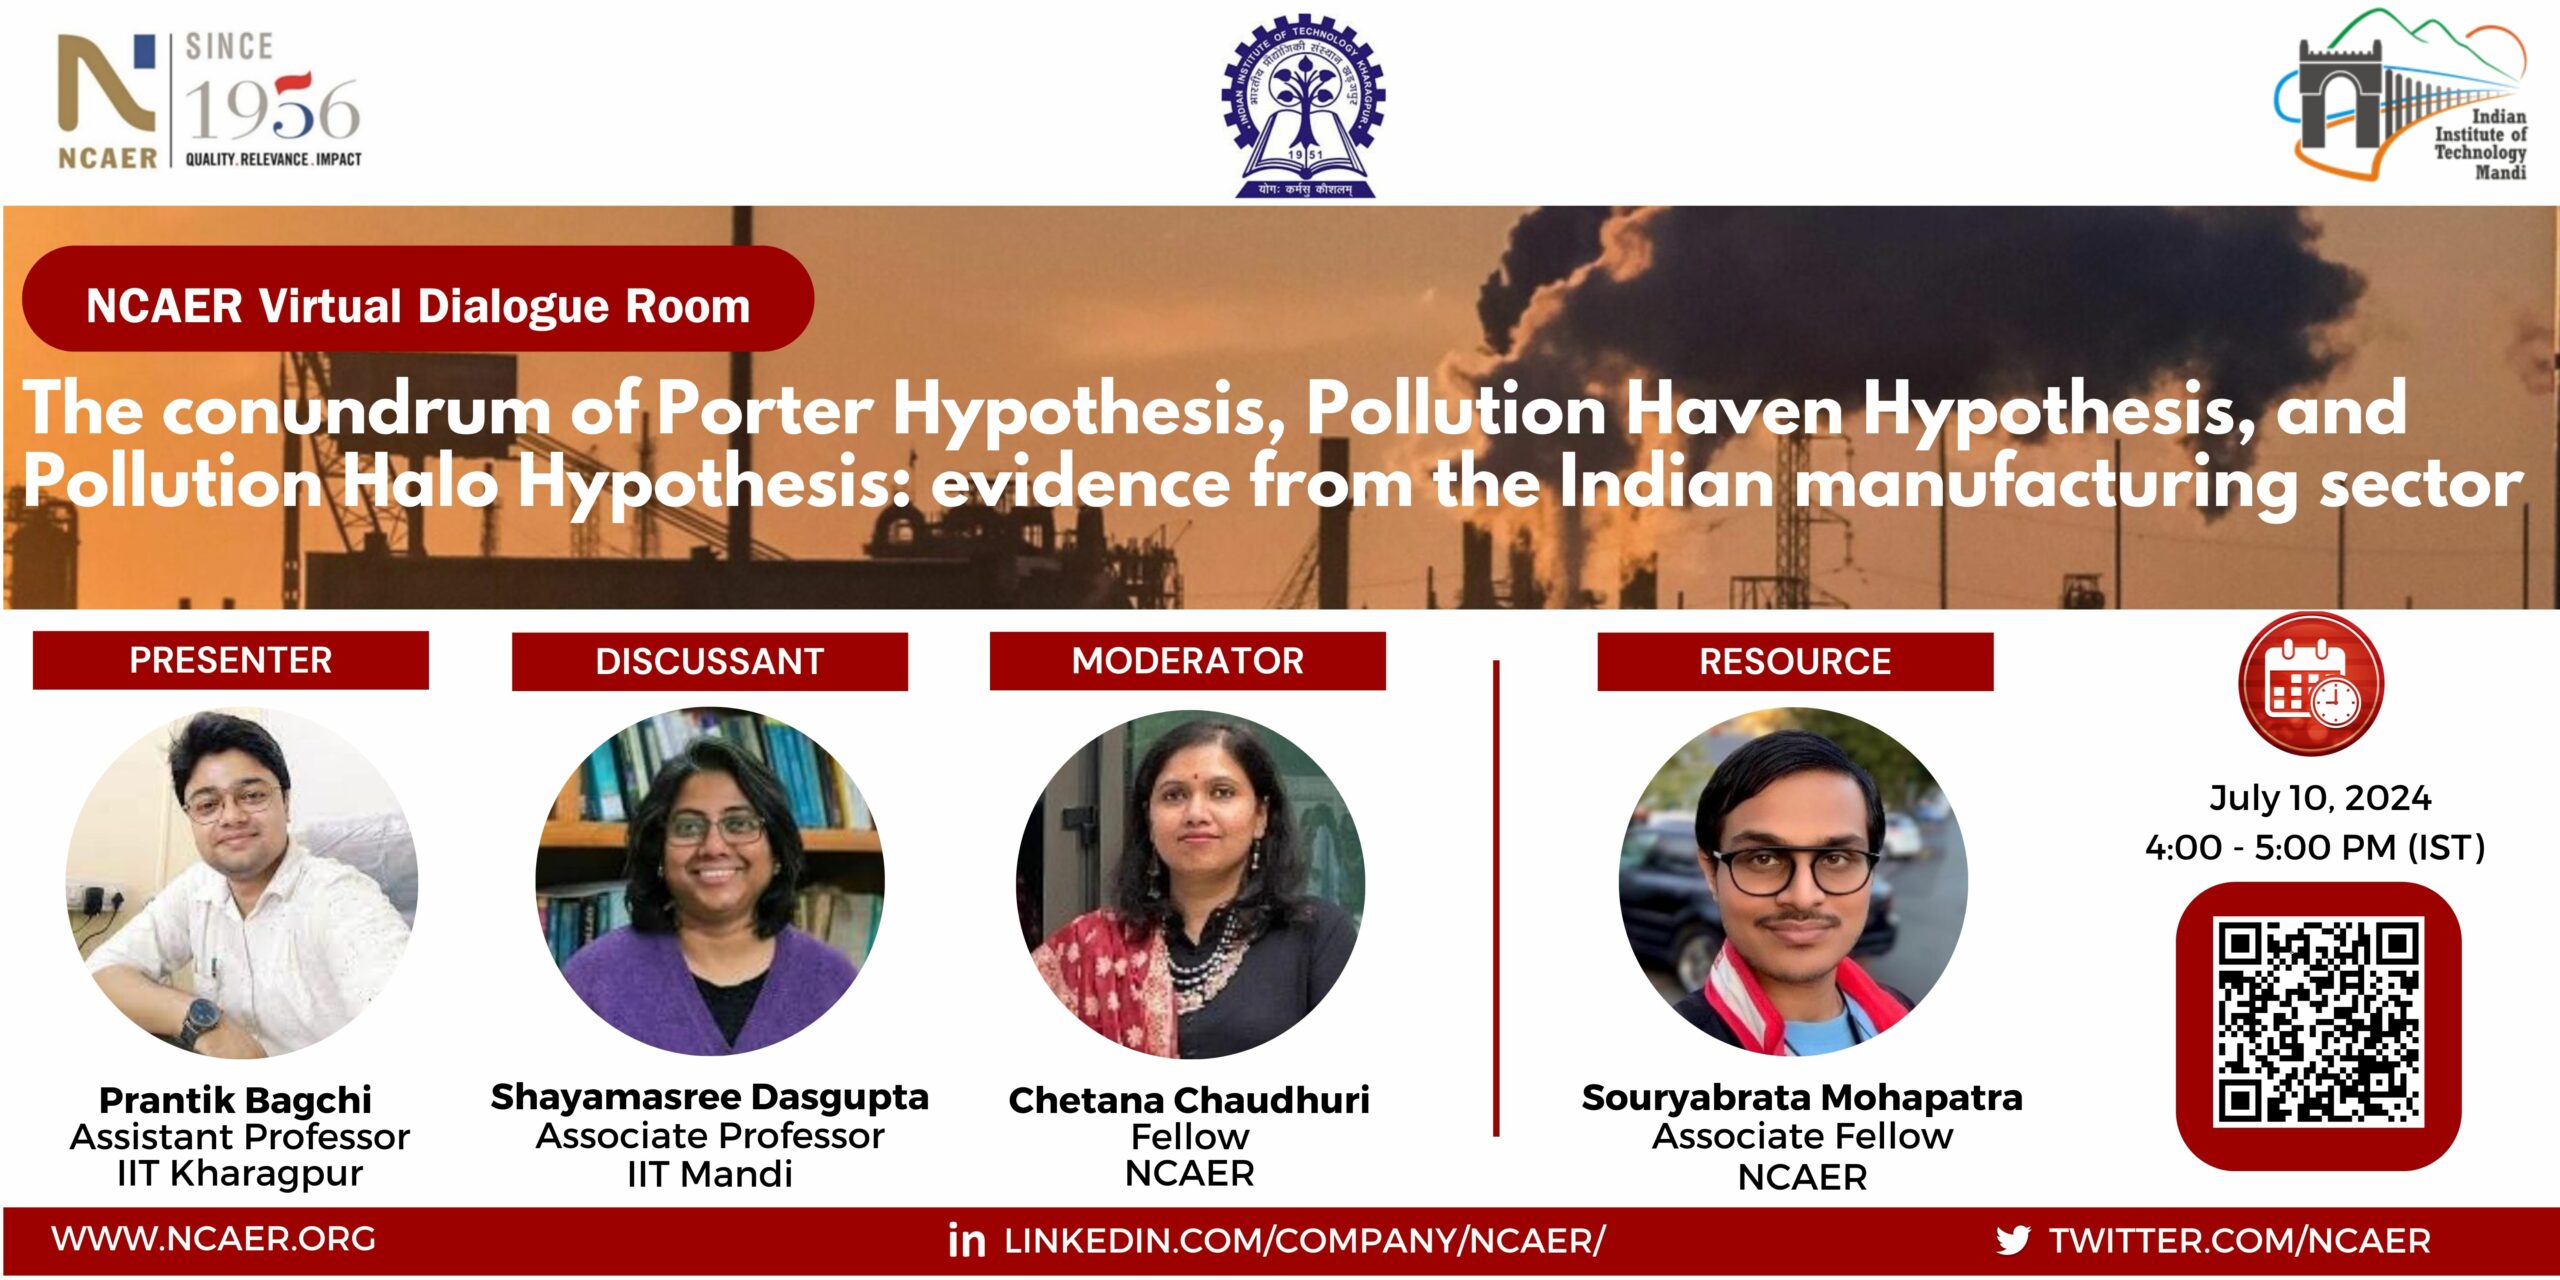 The conundrum of Porter Hypothesis, Pollution Haven Hypothesis, and Pollution Halo Hypothesis: evidence from the Indian manufacturing sector